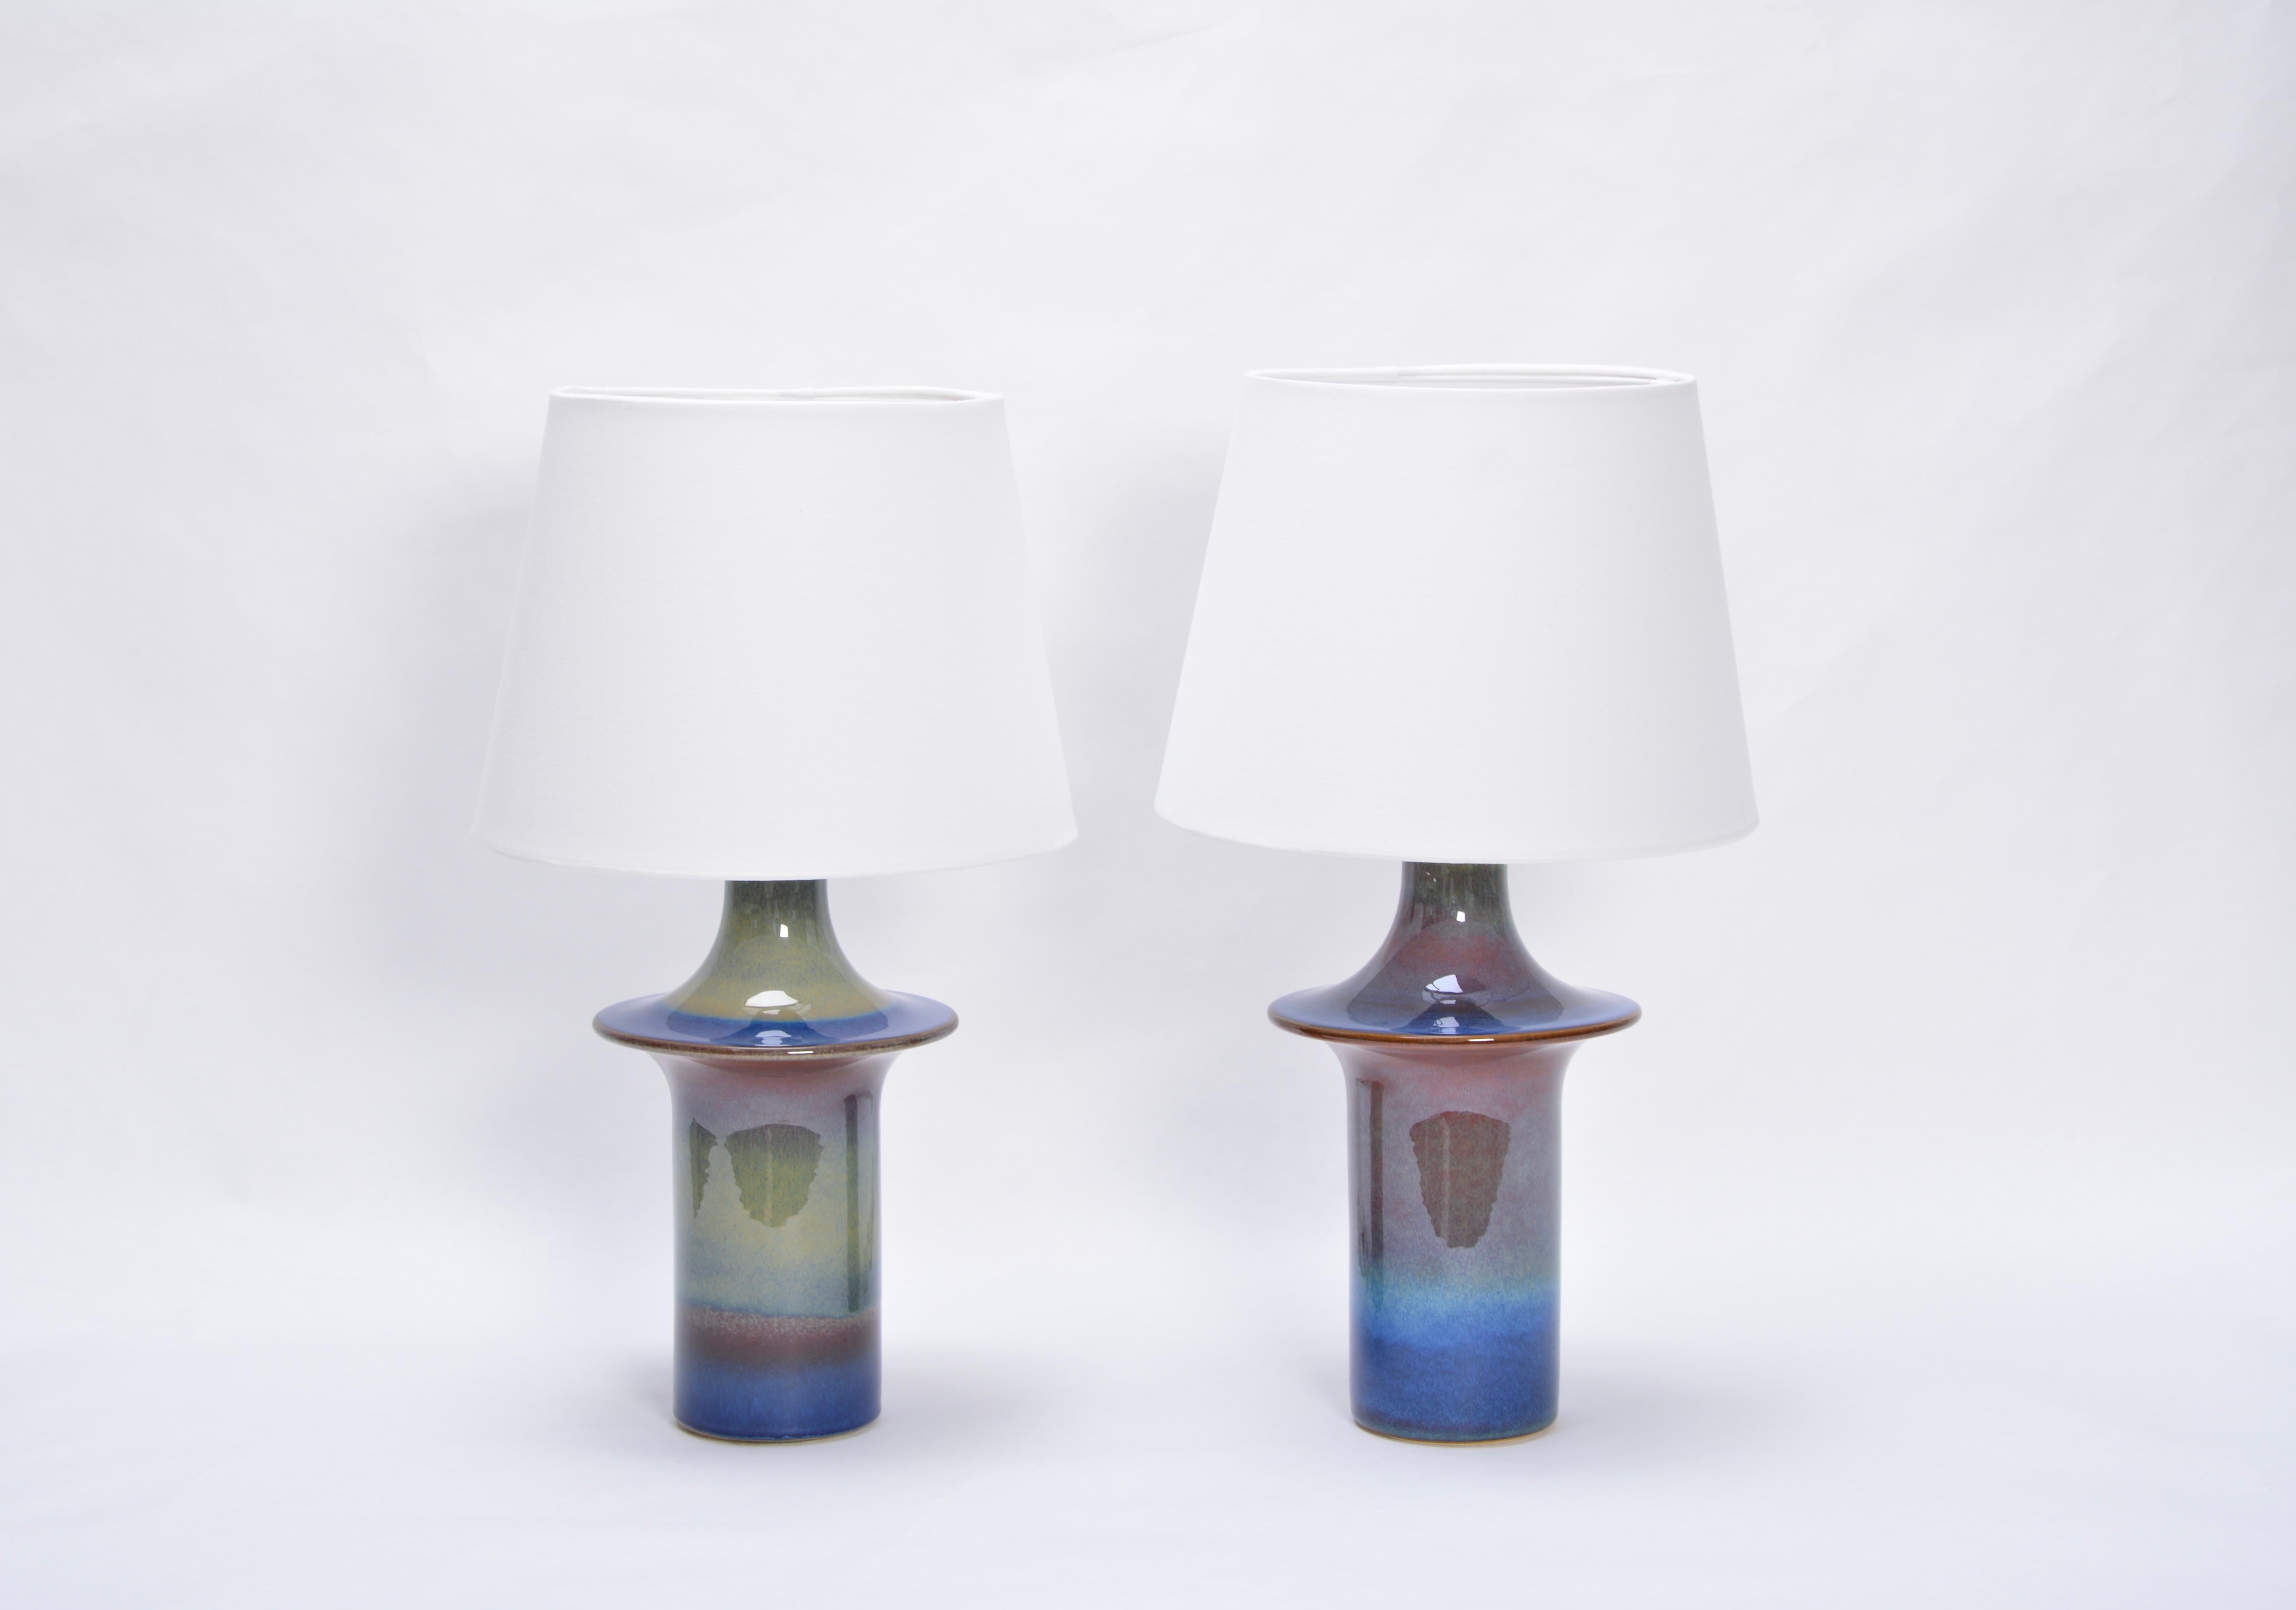 Glazed Pair of Tall Blue Danish Mid-Century Modern Table Lamps by Soholm Model 1070